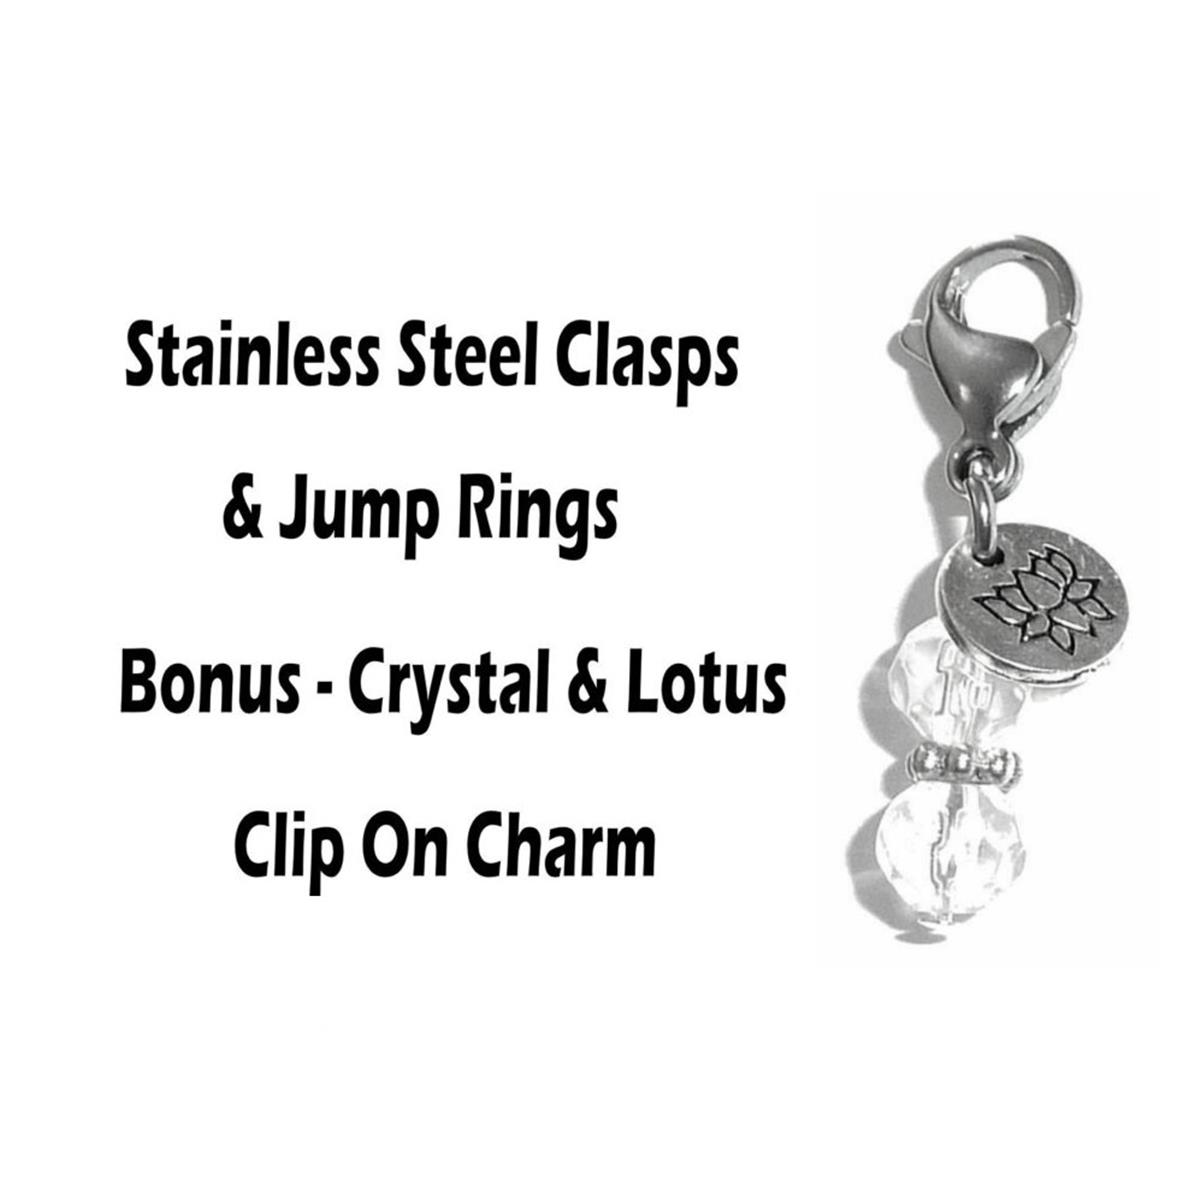 Comedy & Tragedy Clip On Charms - Whimsical Charms Clip On Anywhere